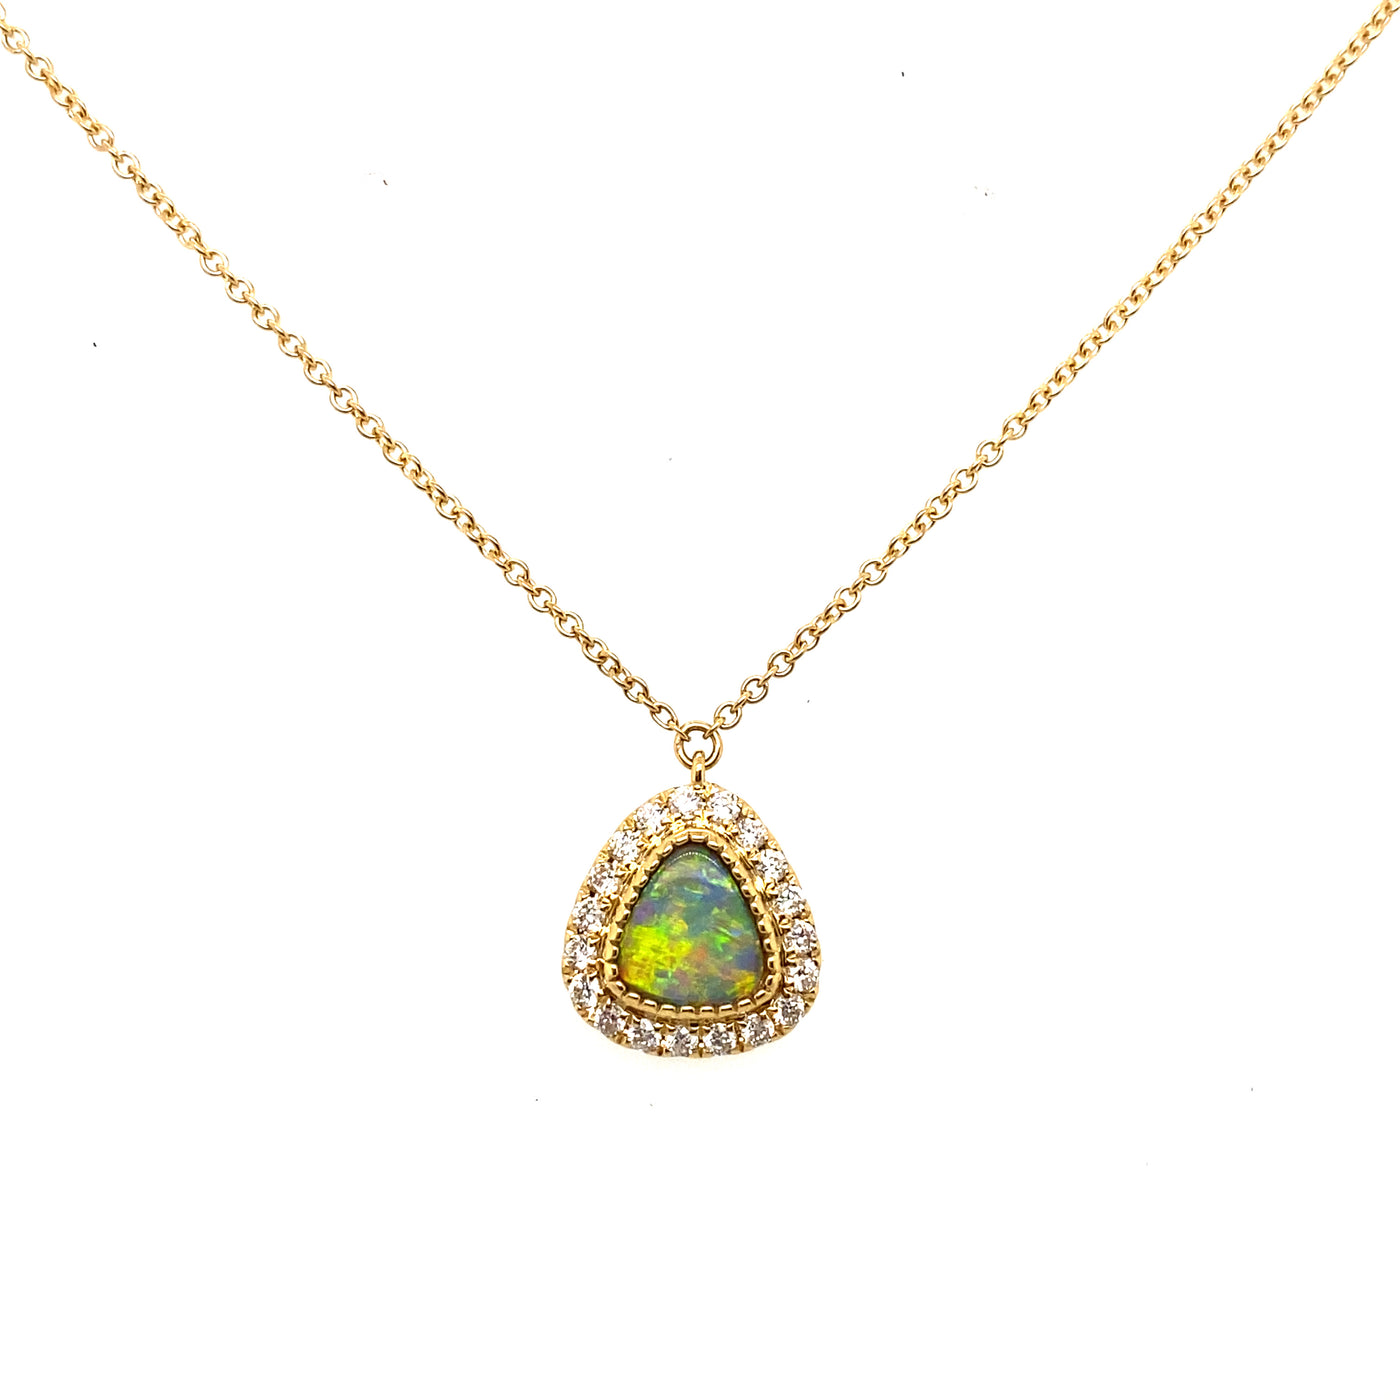 Black Opal and Diamond Necklace